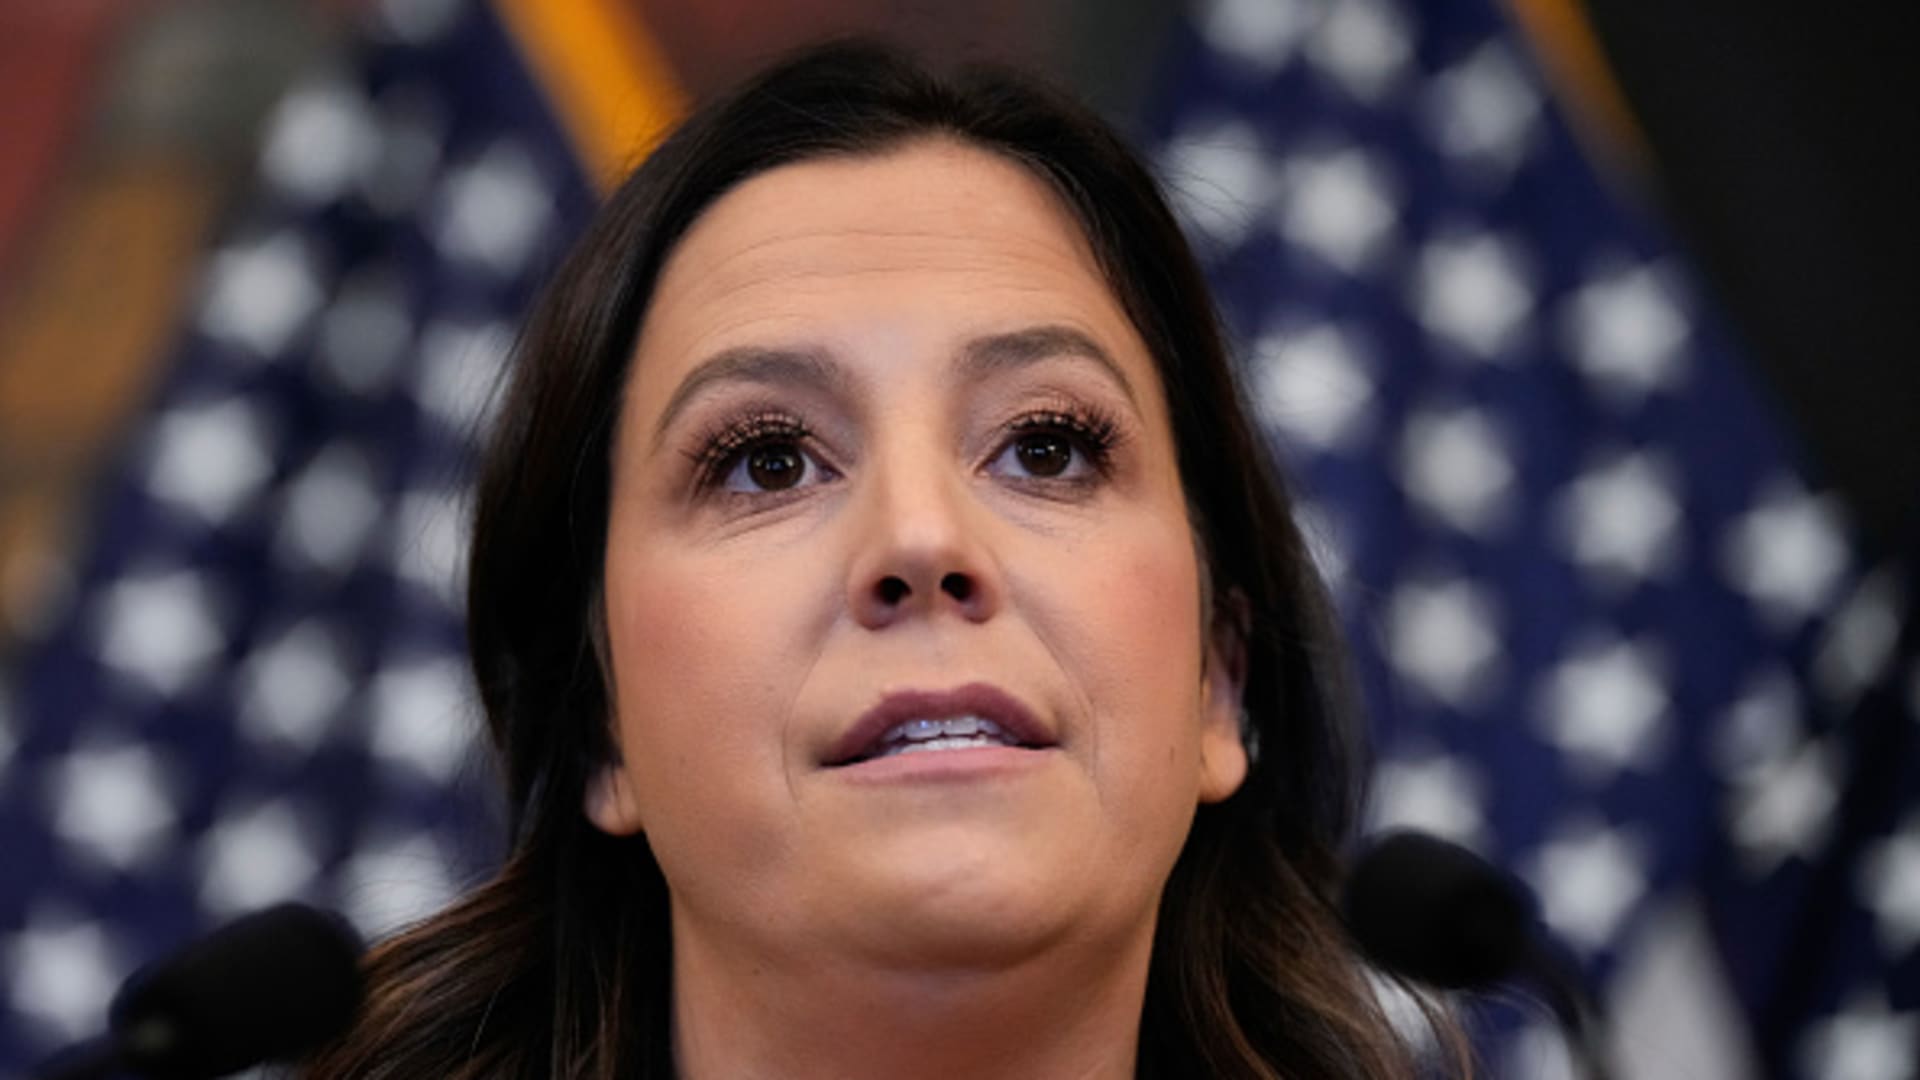 Rep. Elise Stefanik, R-N.Y., speaks during a news conference with House Republican leadership at the U.S. Capitol in Washington, D.C., on Nov. 29, 2023.